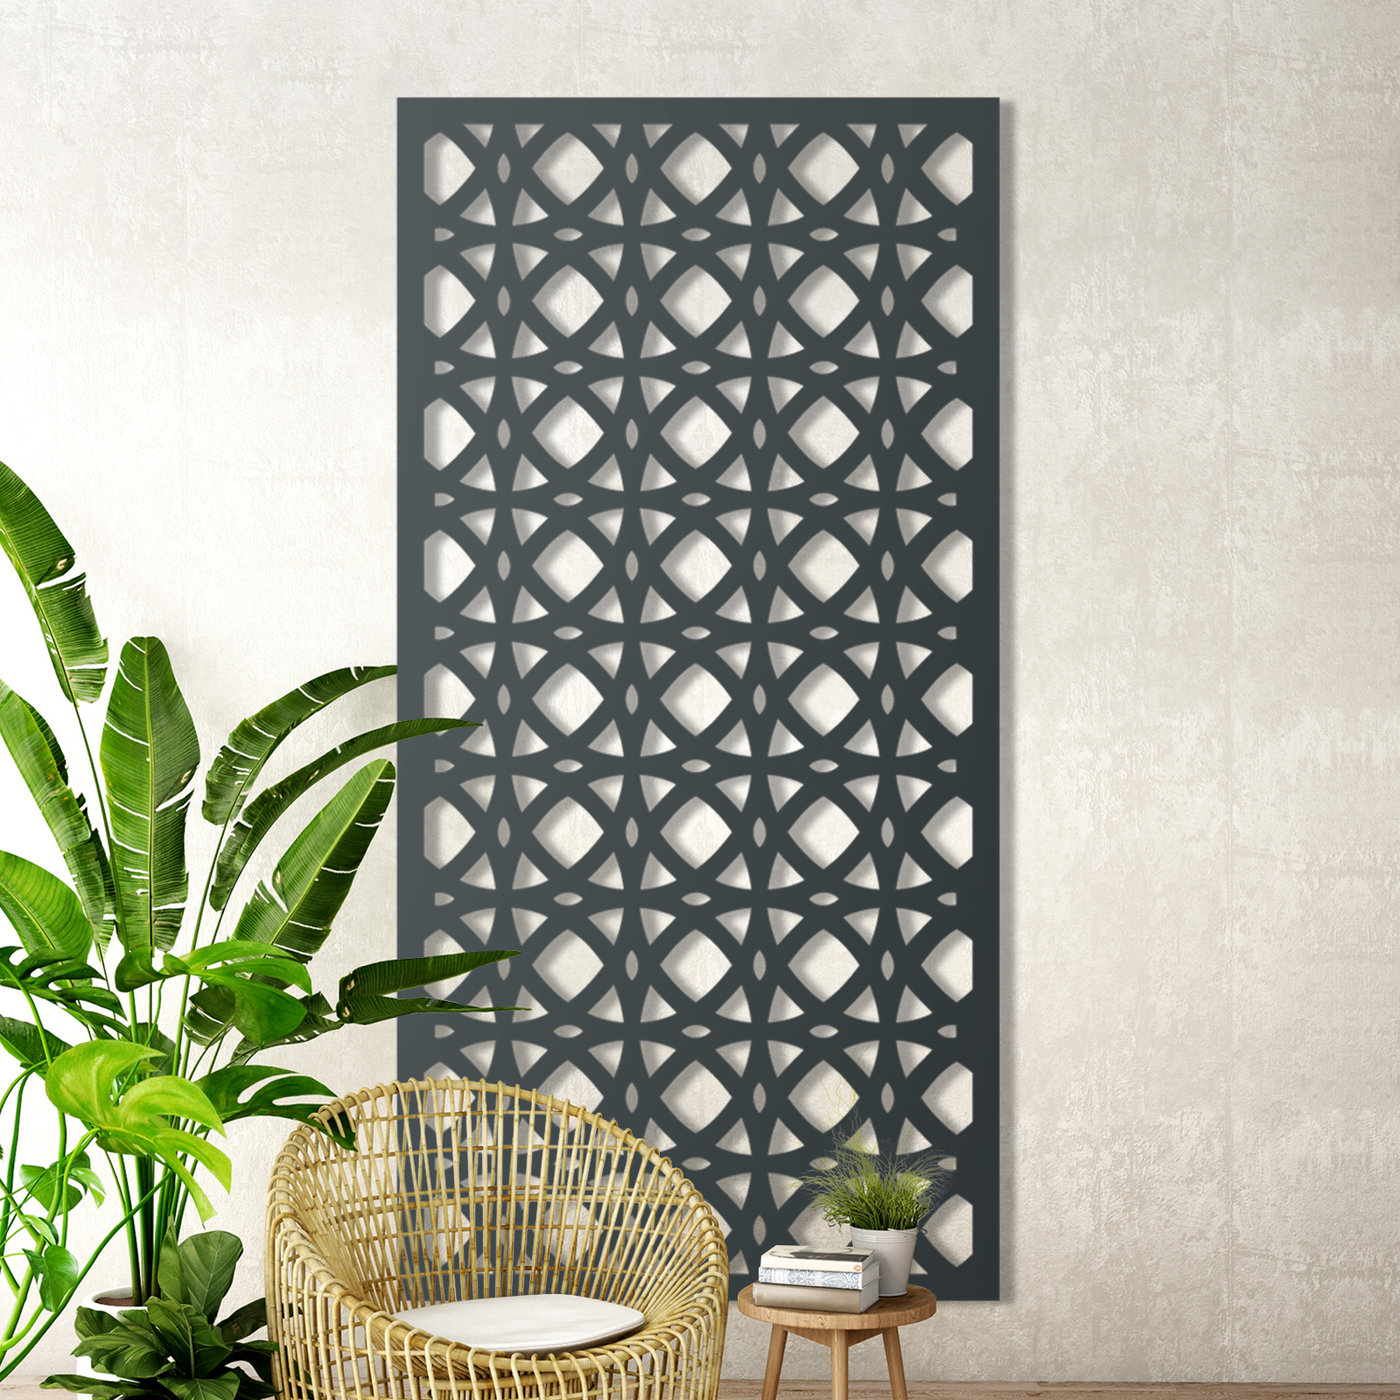 Mosaic Garden Screen: The Durable and Elegant Choice for Outdoor Privacy